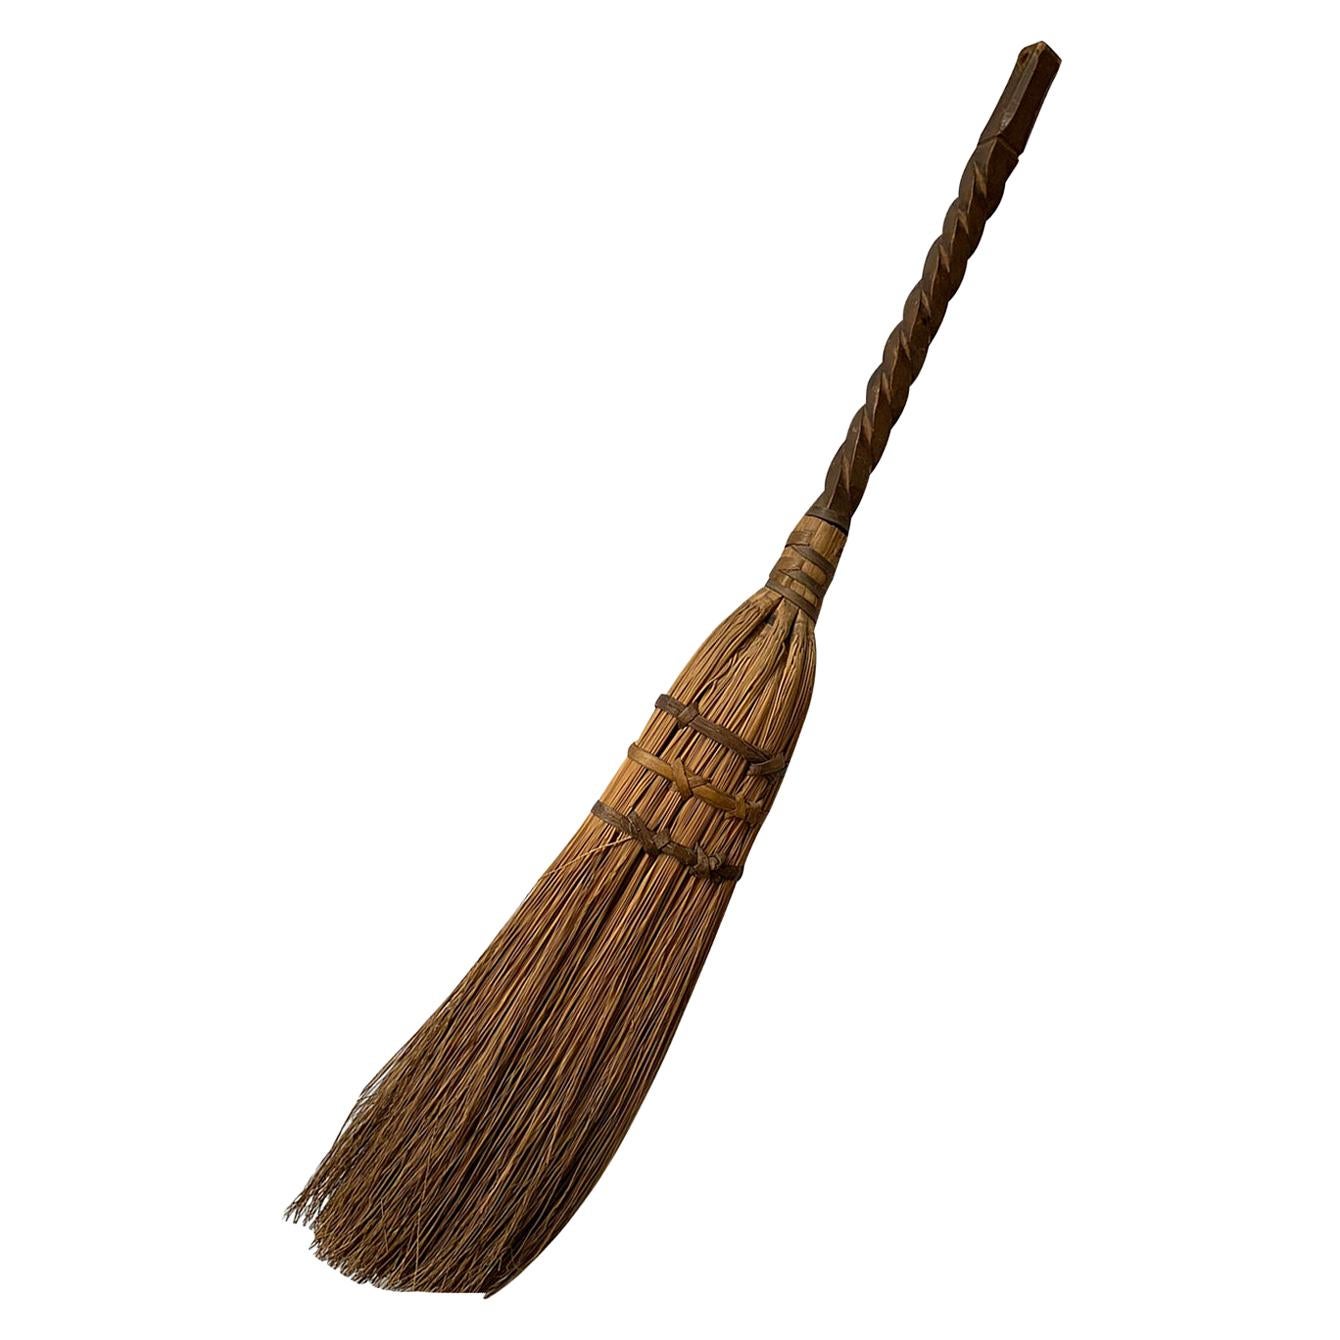 20th Century Broom with Wooden Handle